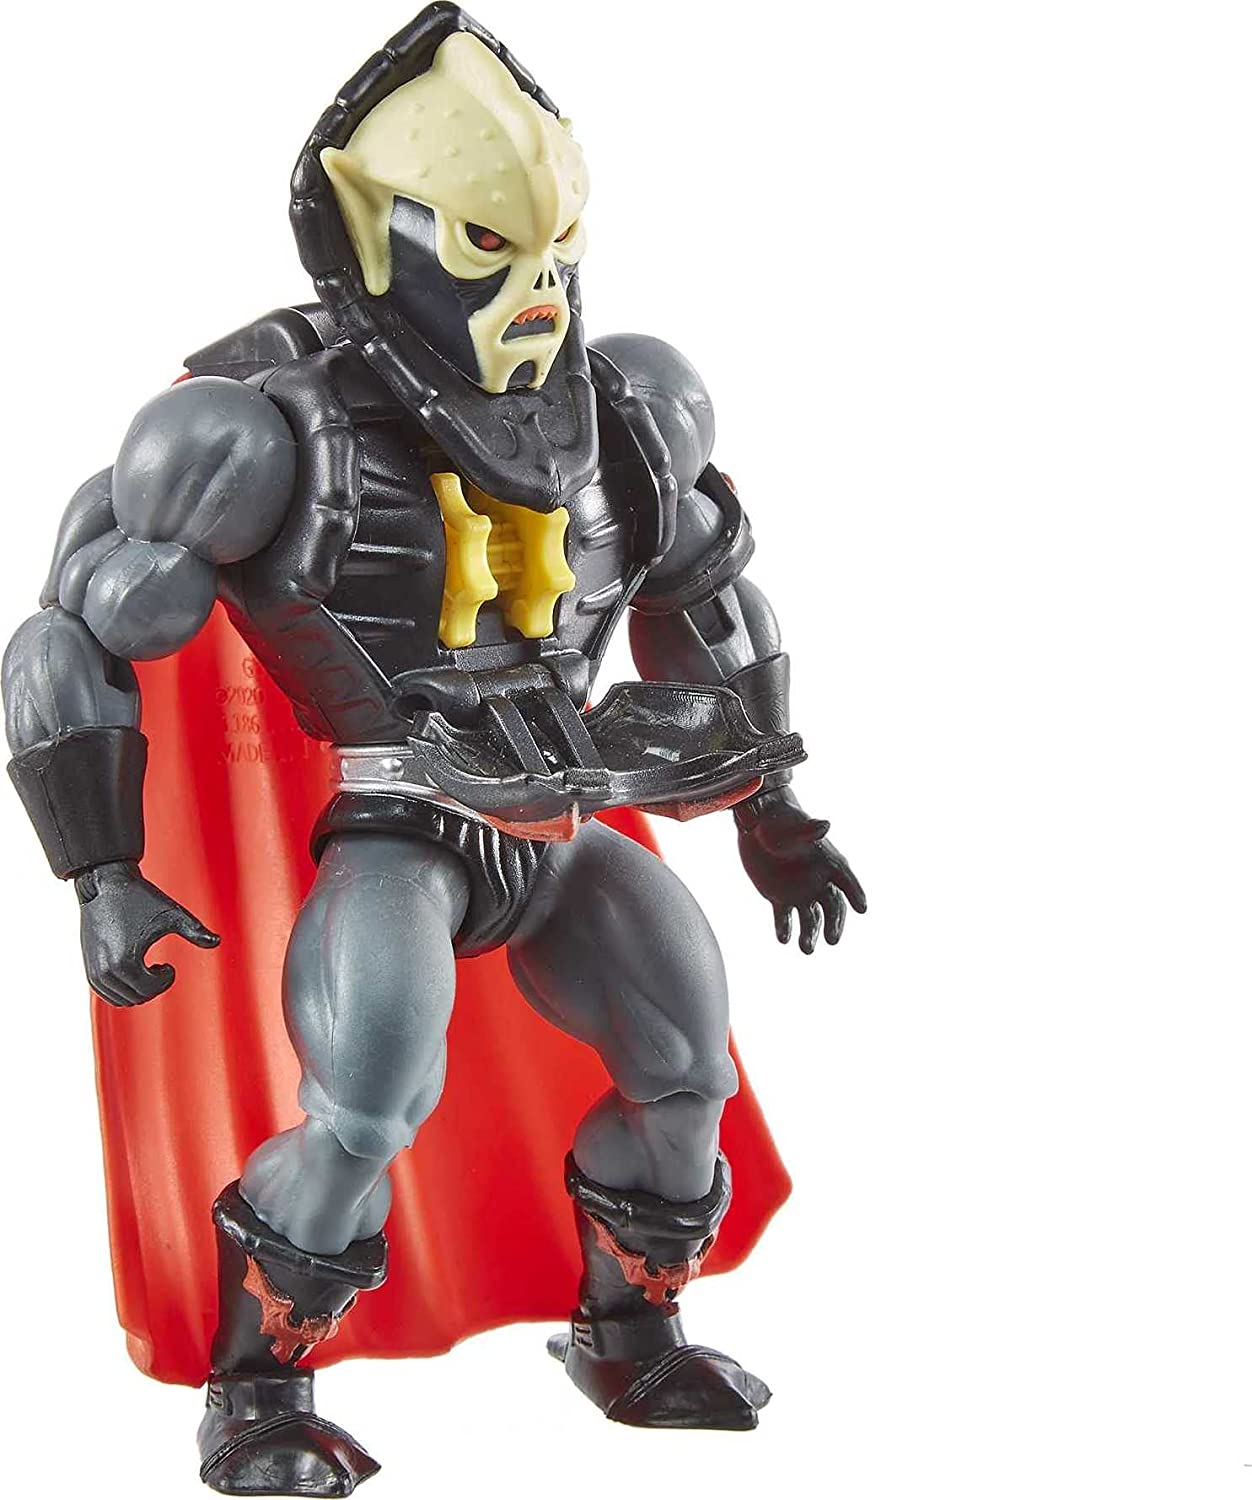 Masters of the Universe Origins Deluxe - Buzz Saw Hordak